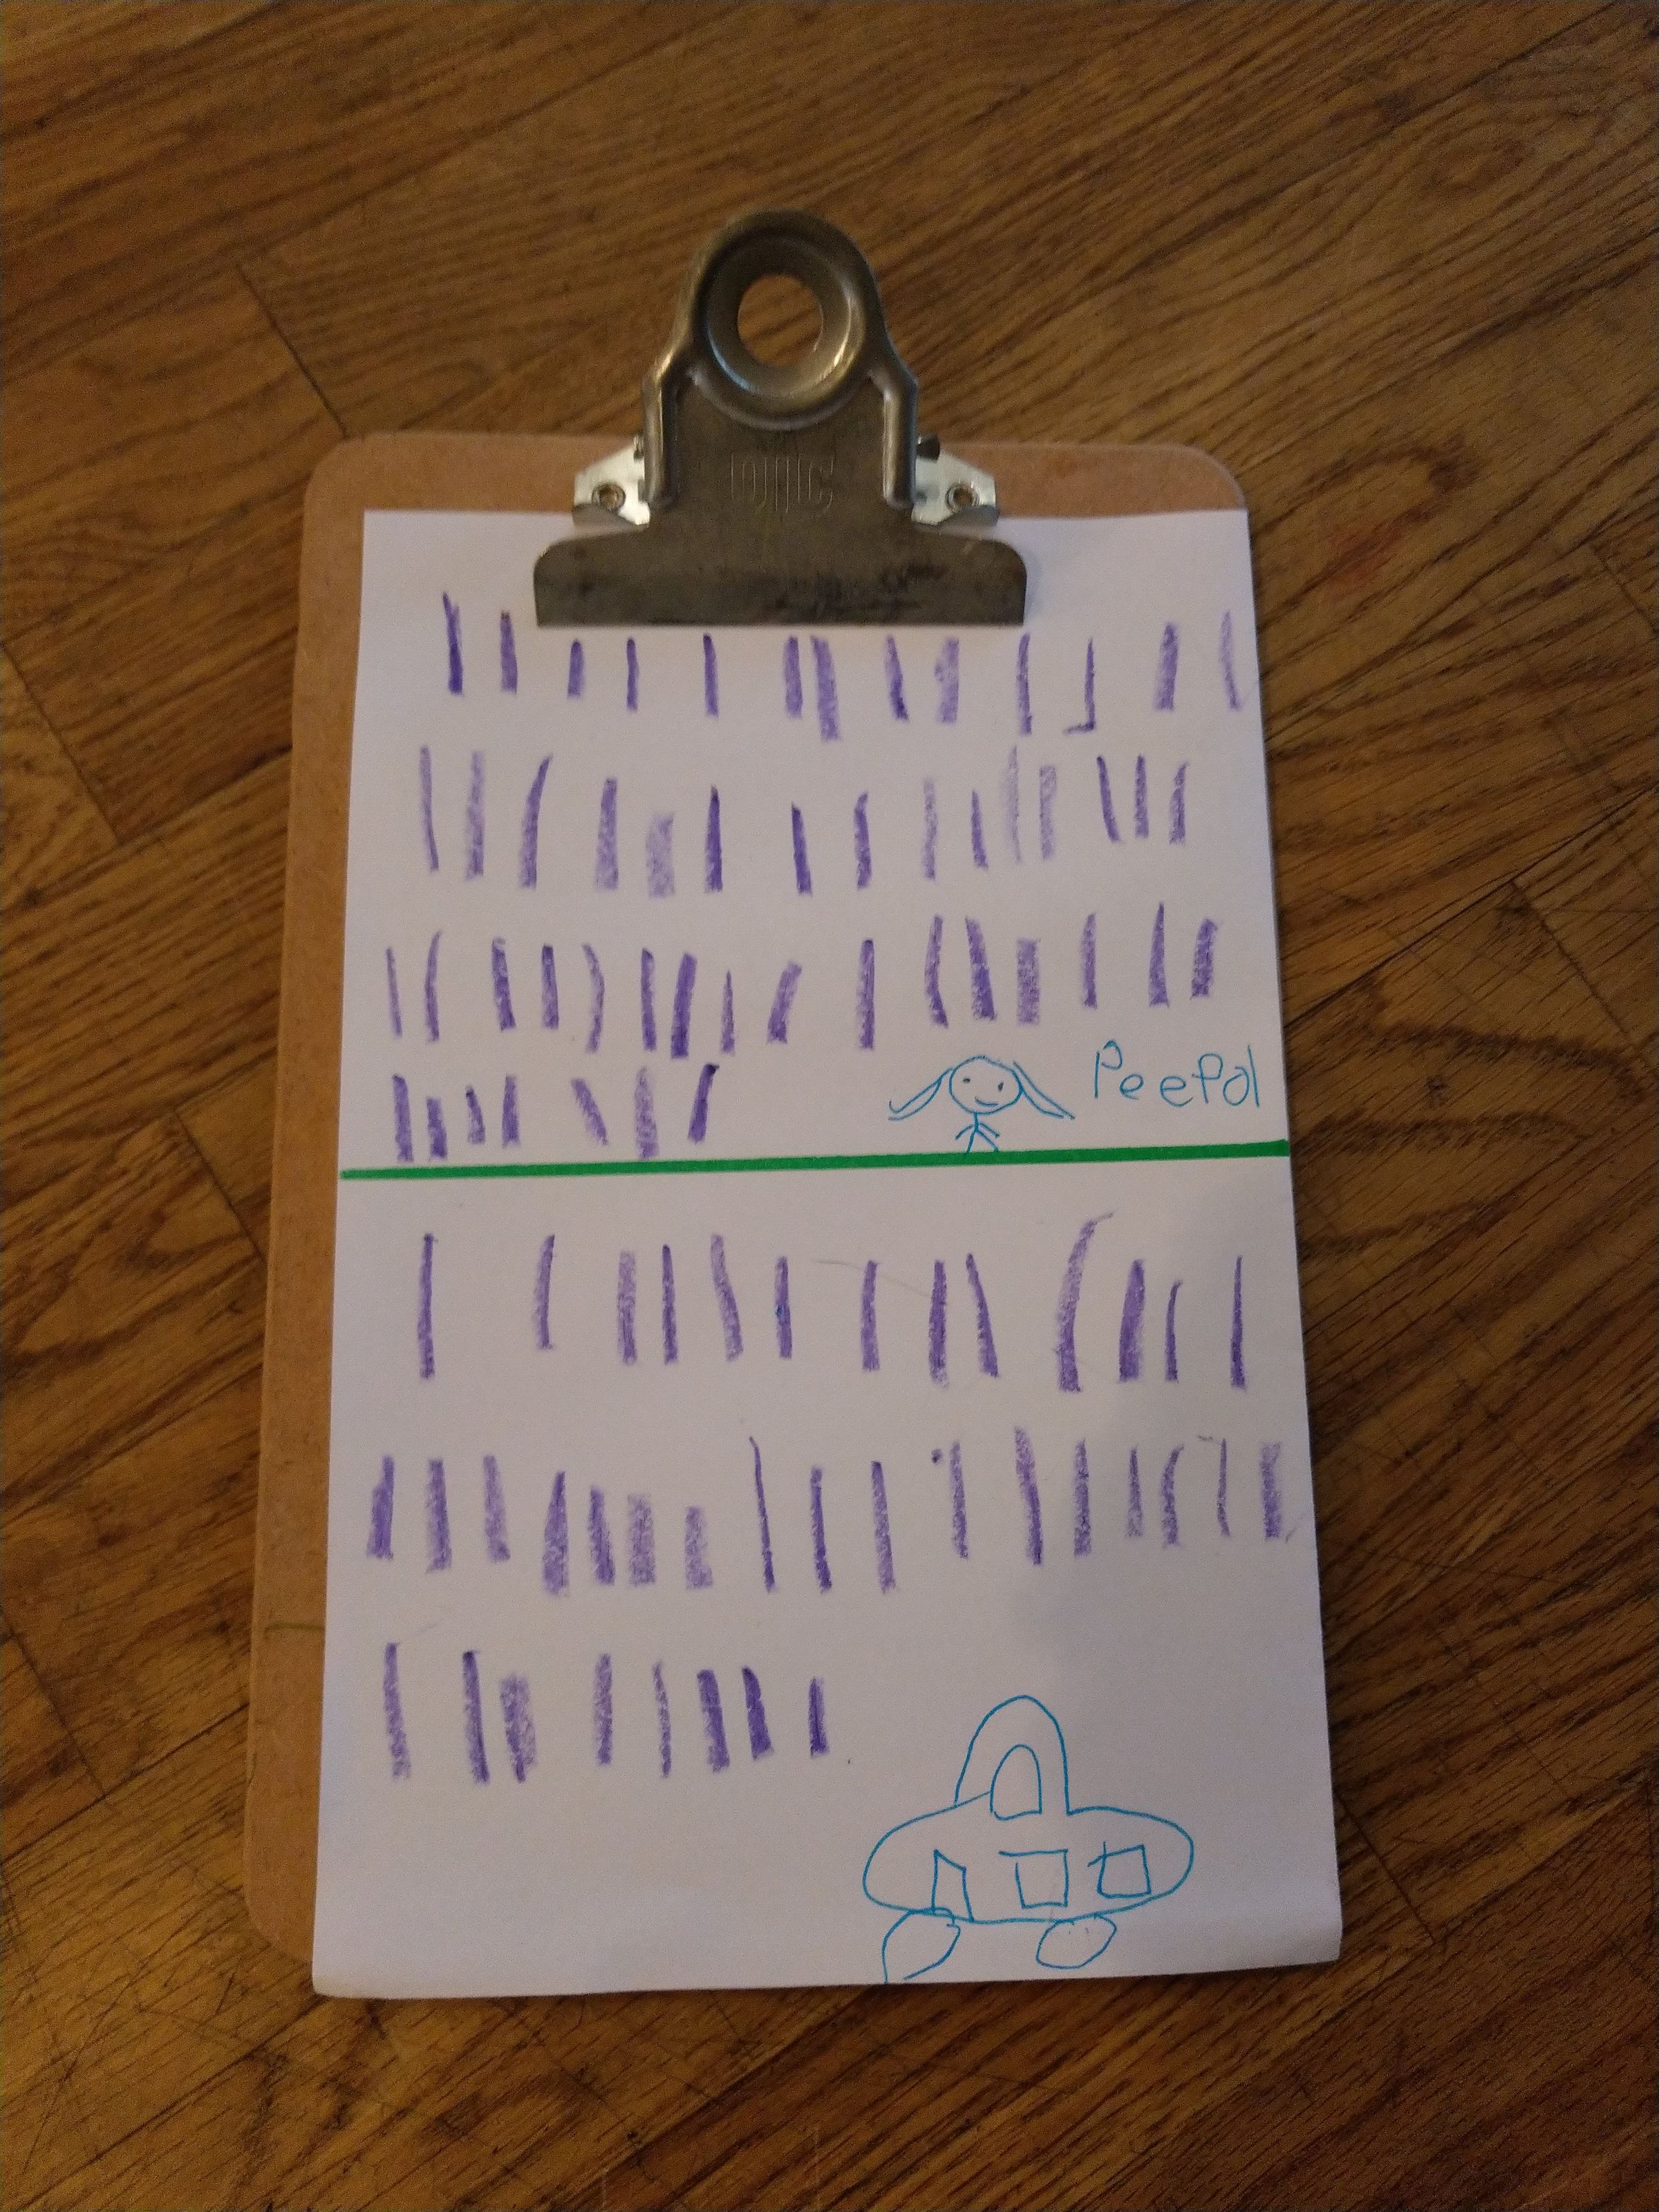 A white piece of paper attached to a clipboard with a child's drawing of a person with PeePol written next to it and a drawing of a car and multiple vertical lines indicating the count of each